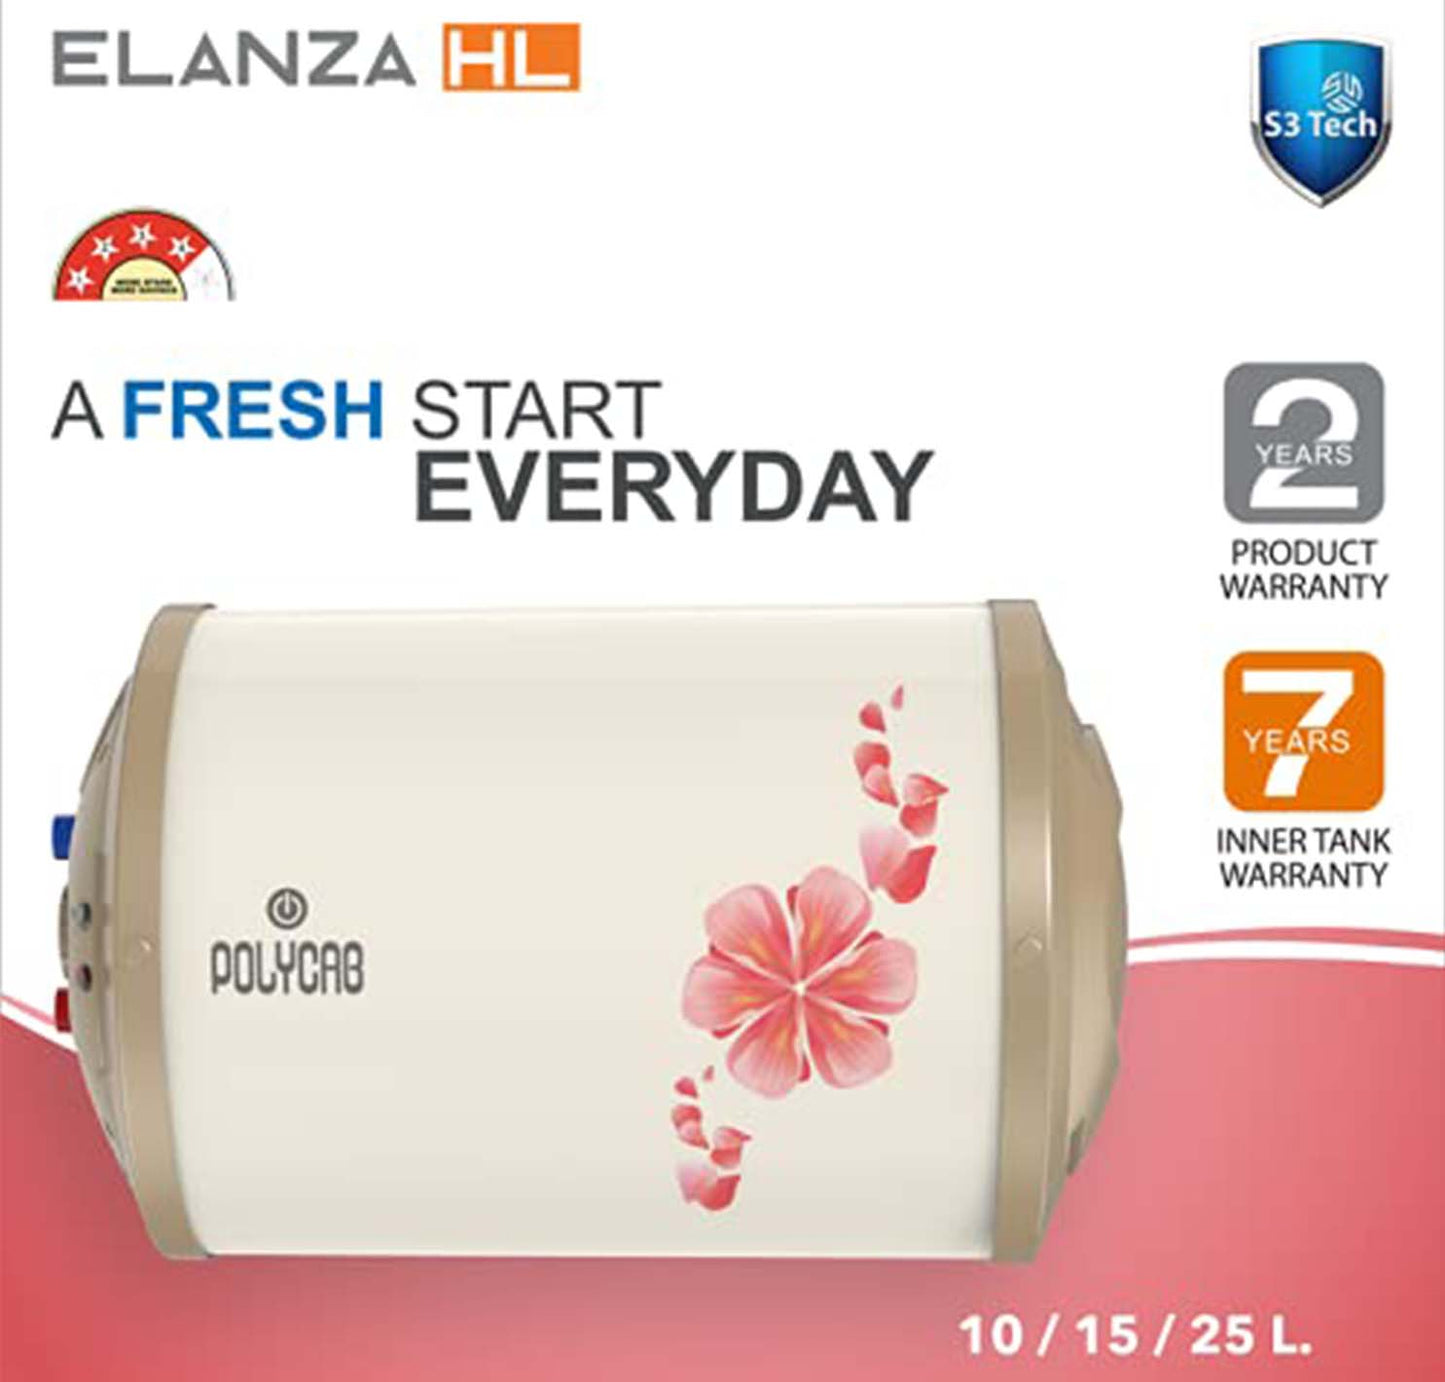 Polycab Elanza HL With Anti Rust Glass Lined Tank Storage Water Heater - 2KW